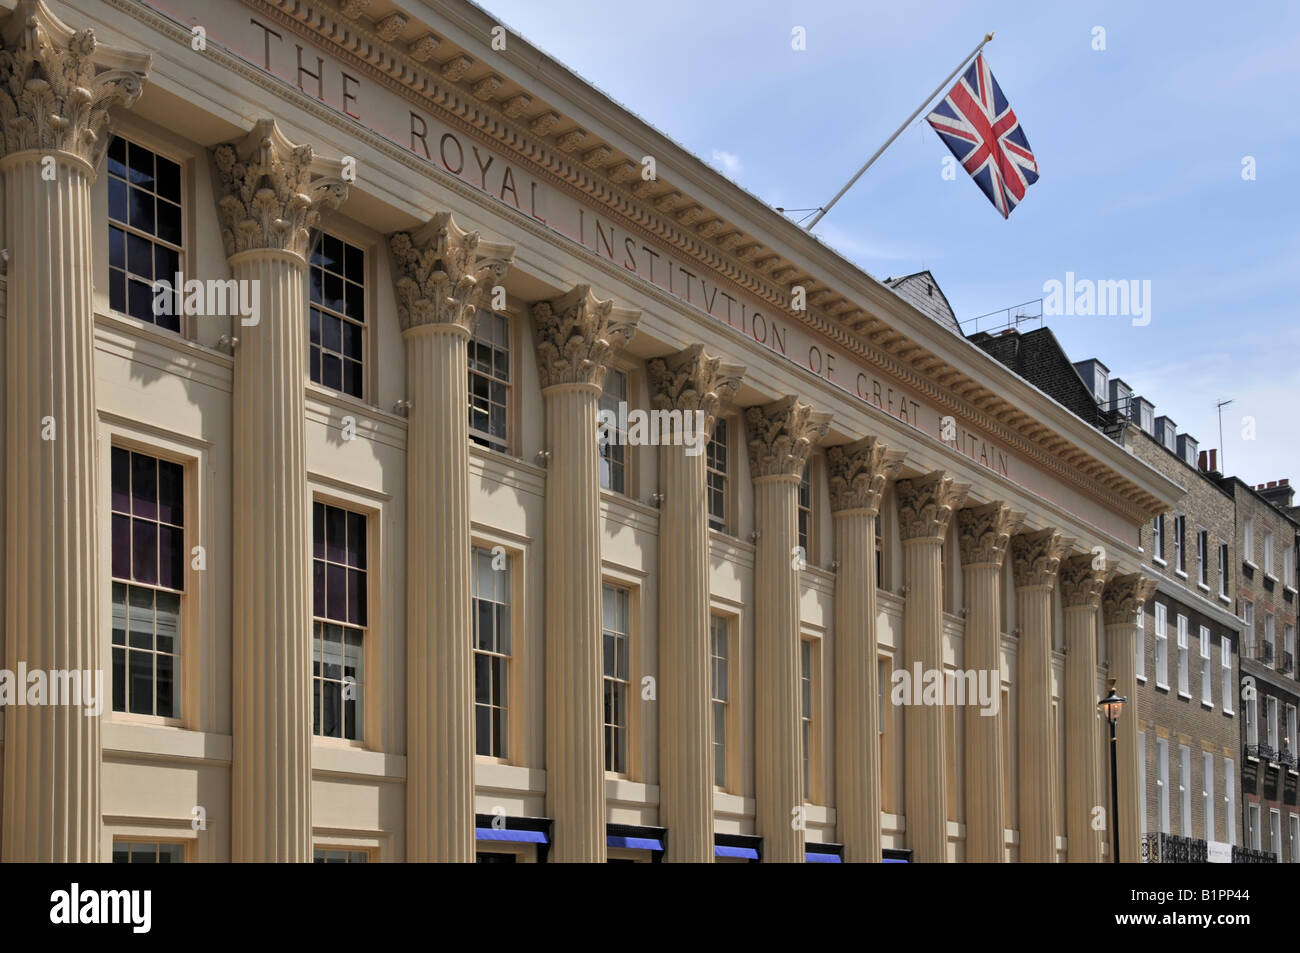 Royal Institution of Great Britain & Faraday Museum building facade at  roof level a colonnade Corinthian capitals Albemarle Street London England UK Stock Photo